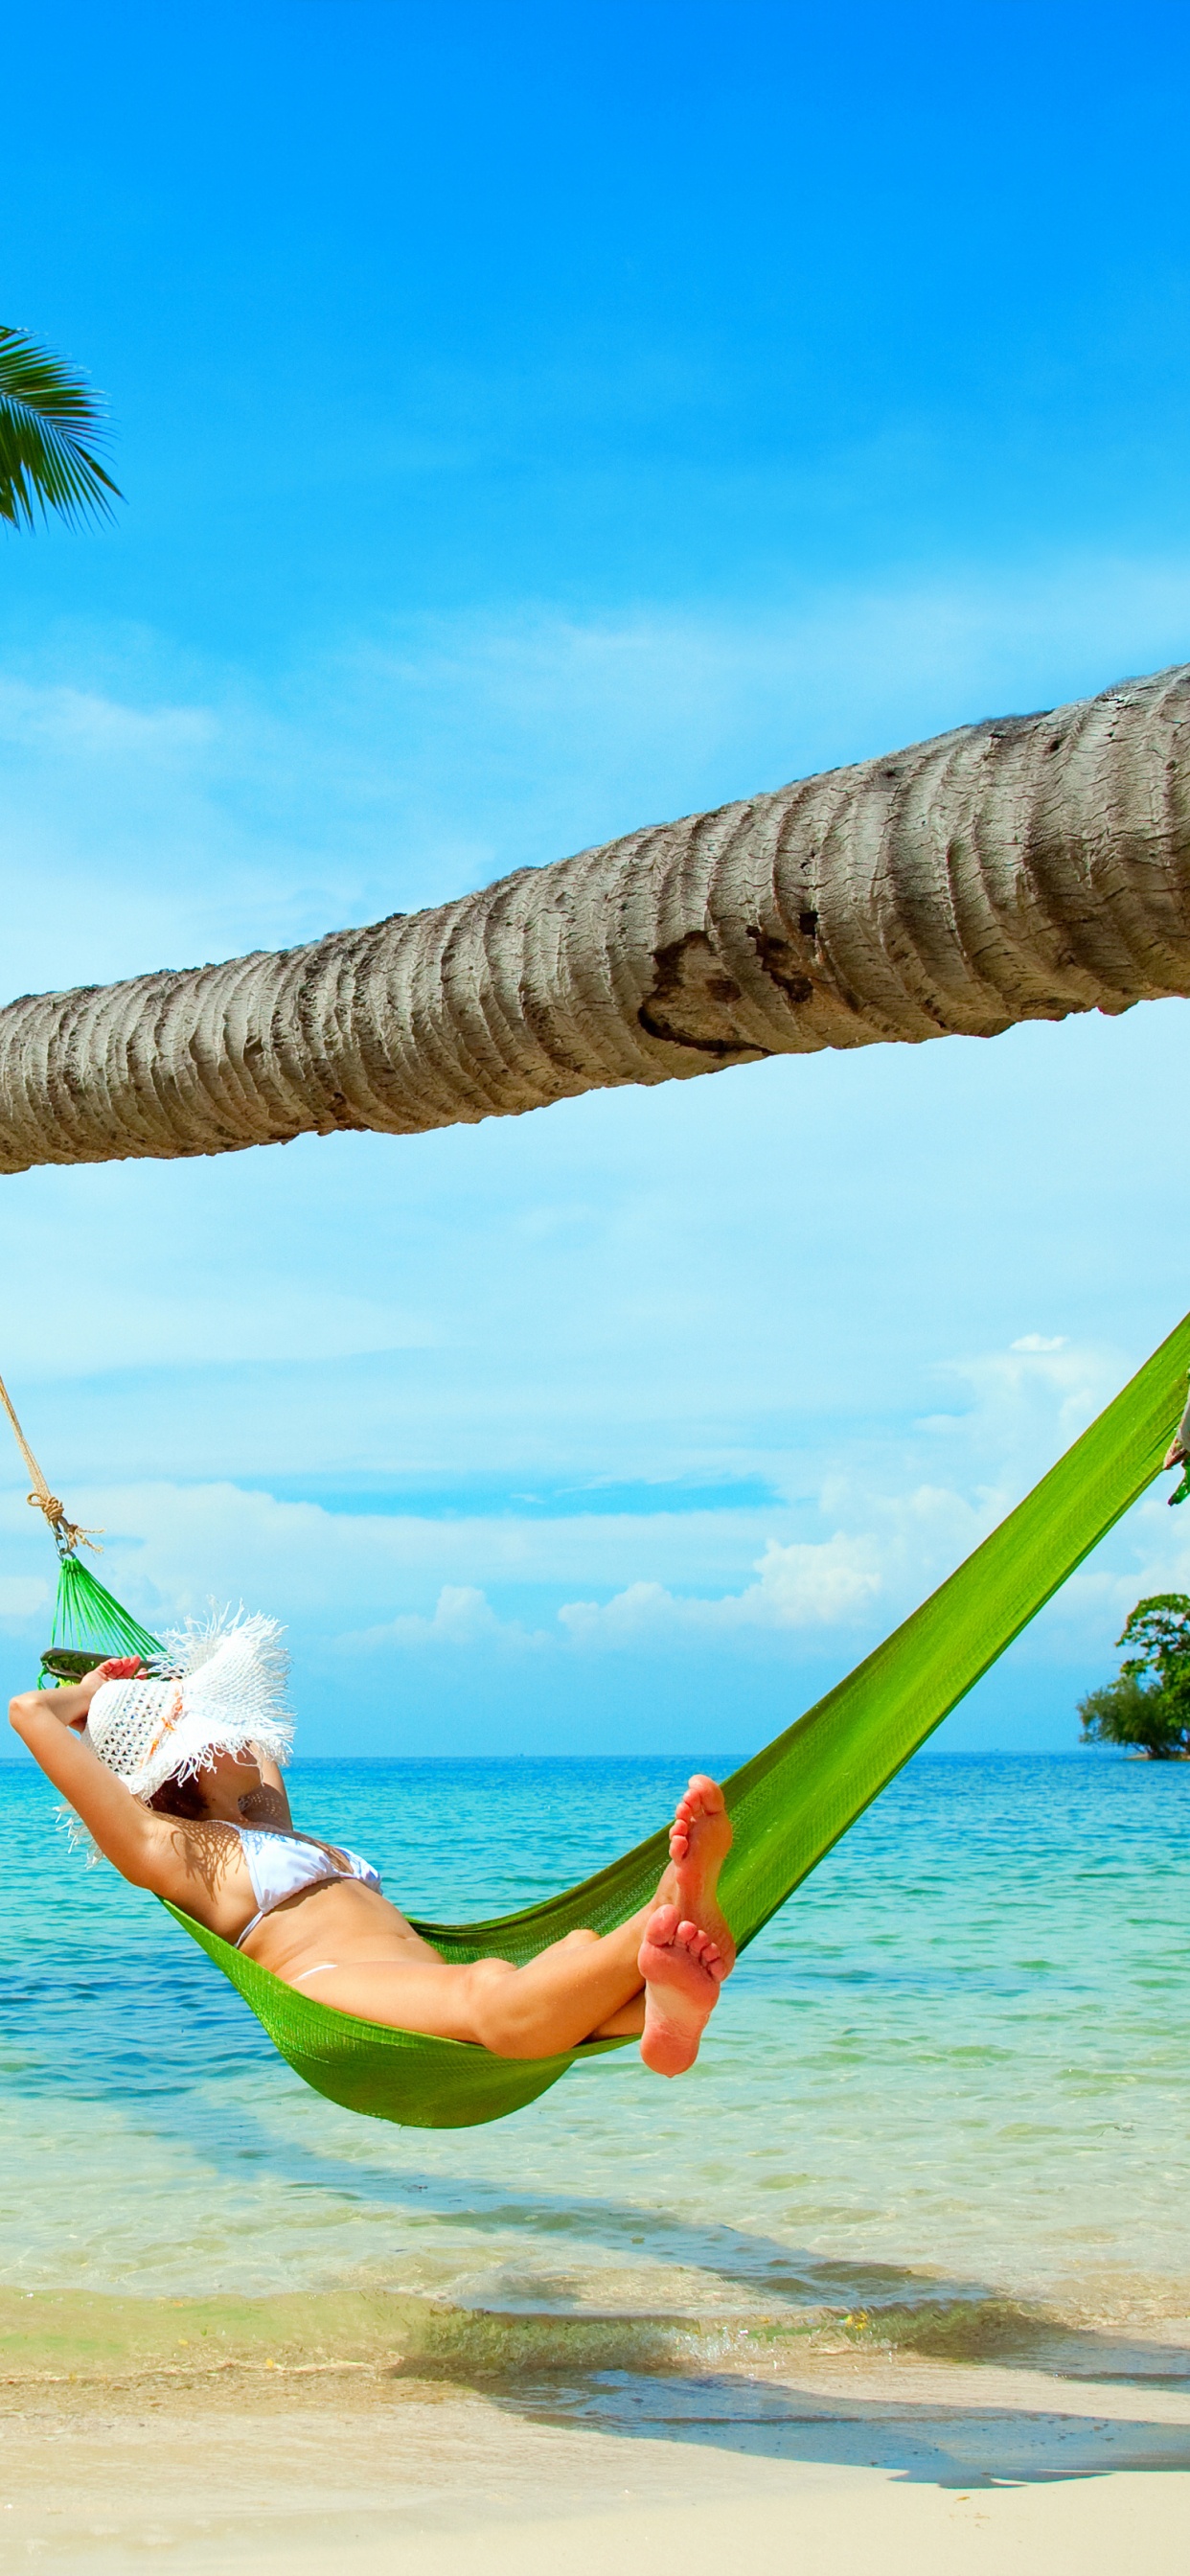 Woman in White Shirt and Green Shorts Lying on Hammock Under Coconut Tree During Daytime. Wallpaper in 1242x2688 Resolution